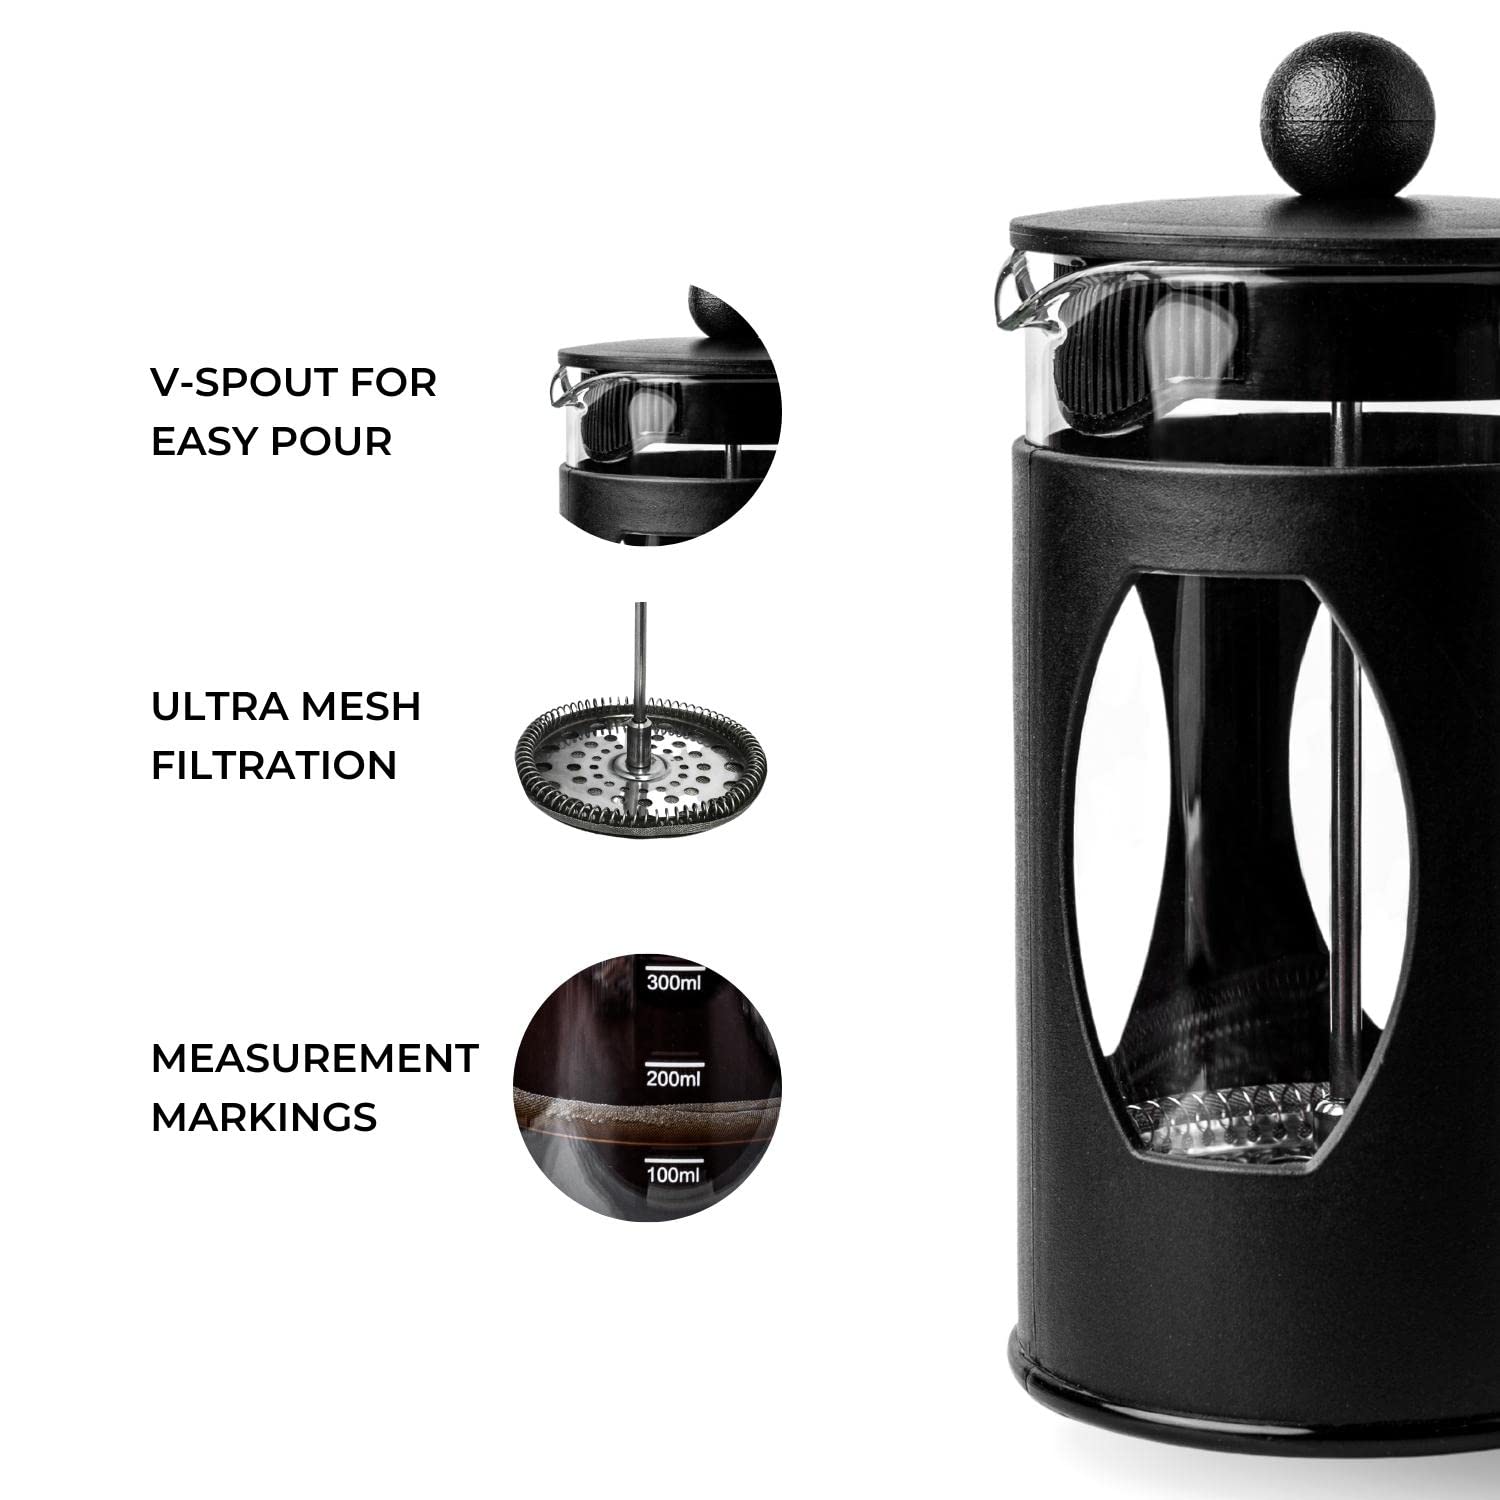 Buy Sipologie Classic French Press Coffee Maker for Home, 600ml